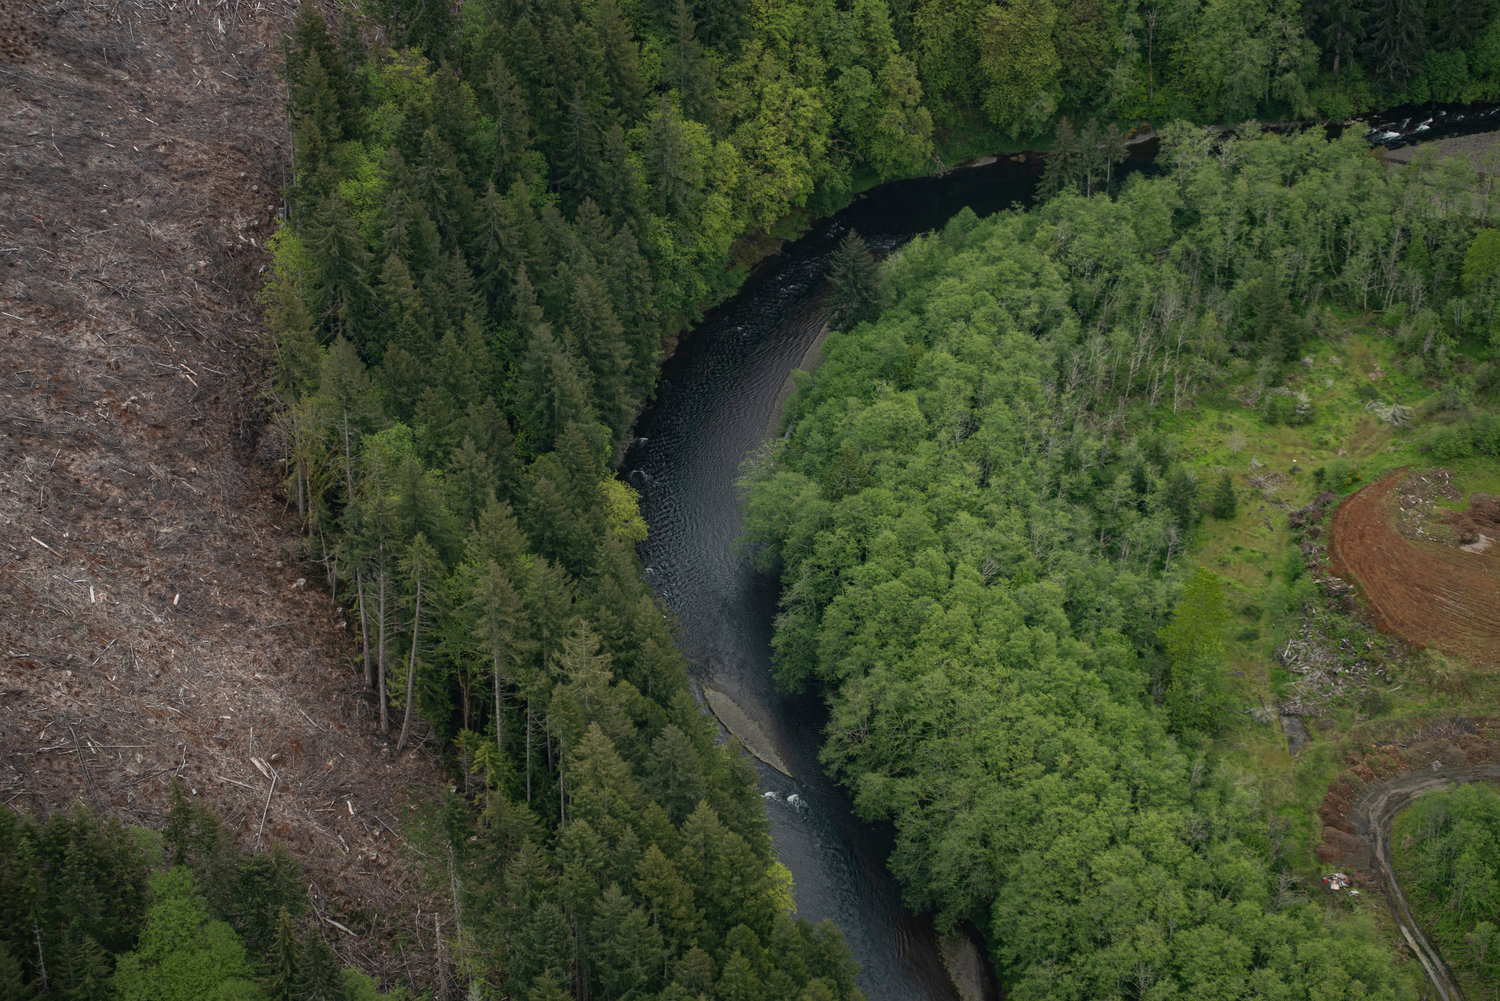 The Chehalis River meanders through clear-cut timberland on Weyerhaeuser property upstream from Pe Ell. Loggers are required to maintain trees in the riparian zone.